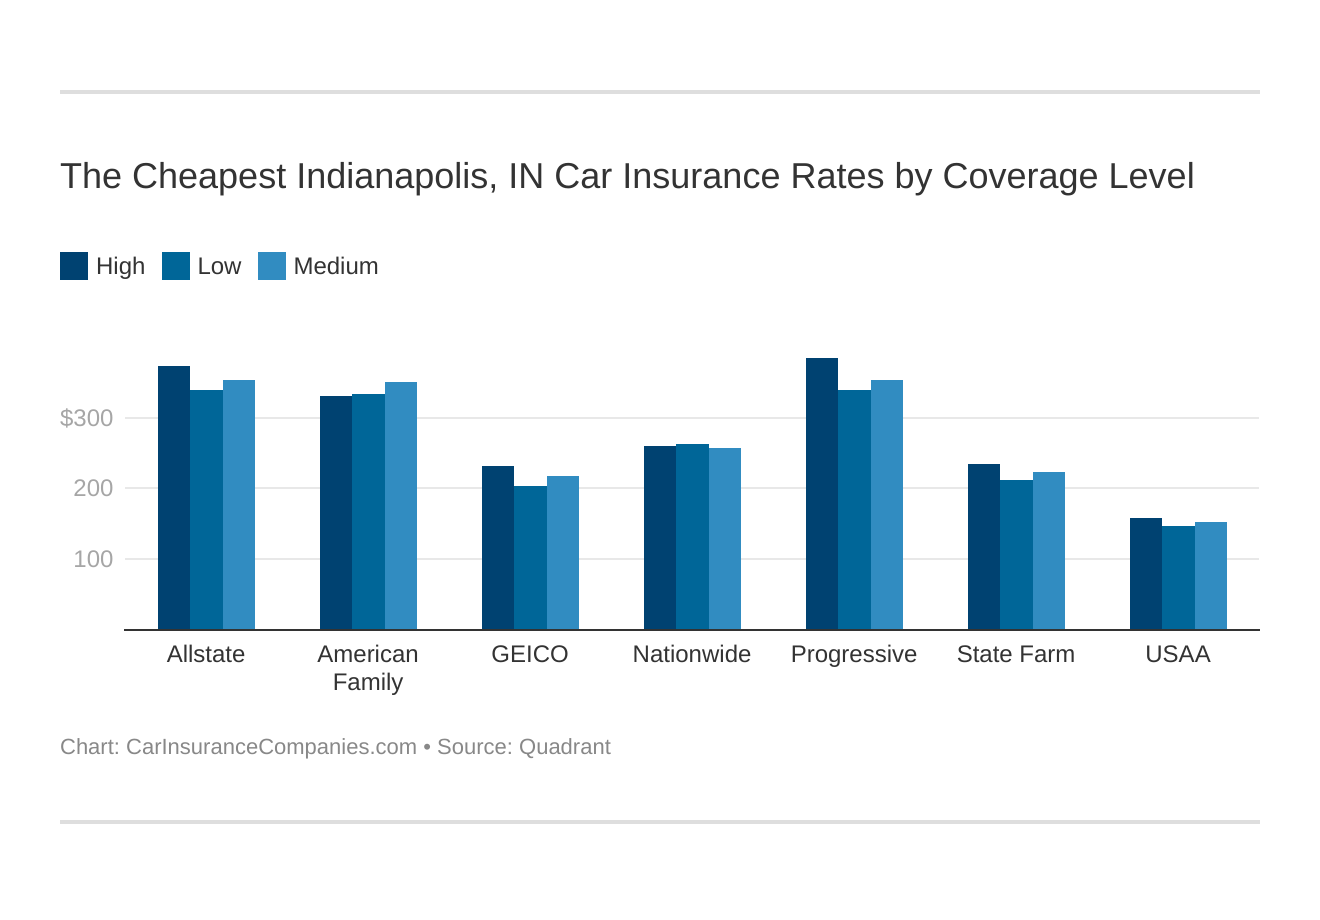 The Cheapest Indianapolis, IN Car Insurance Rates by Coverage Level